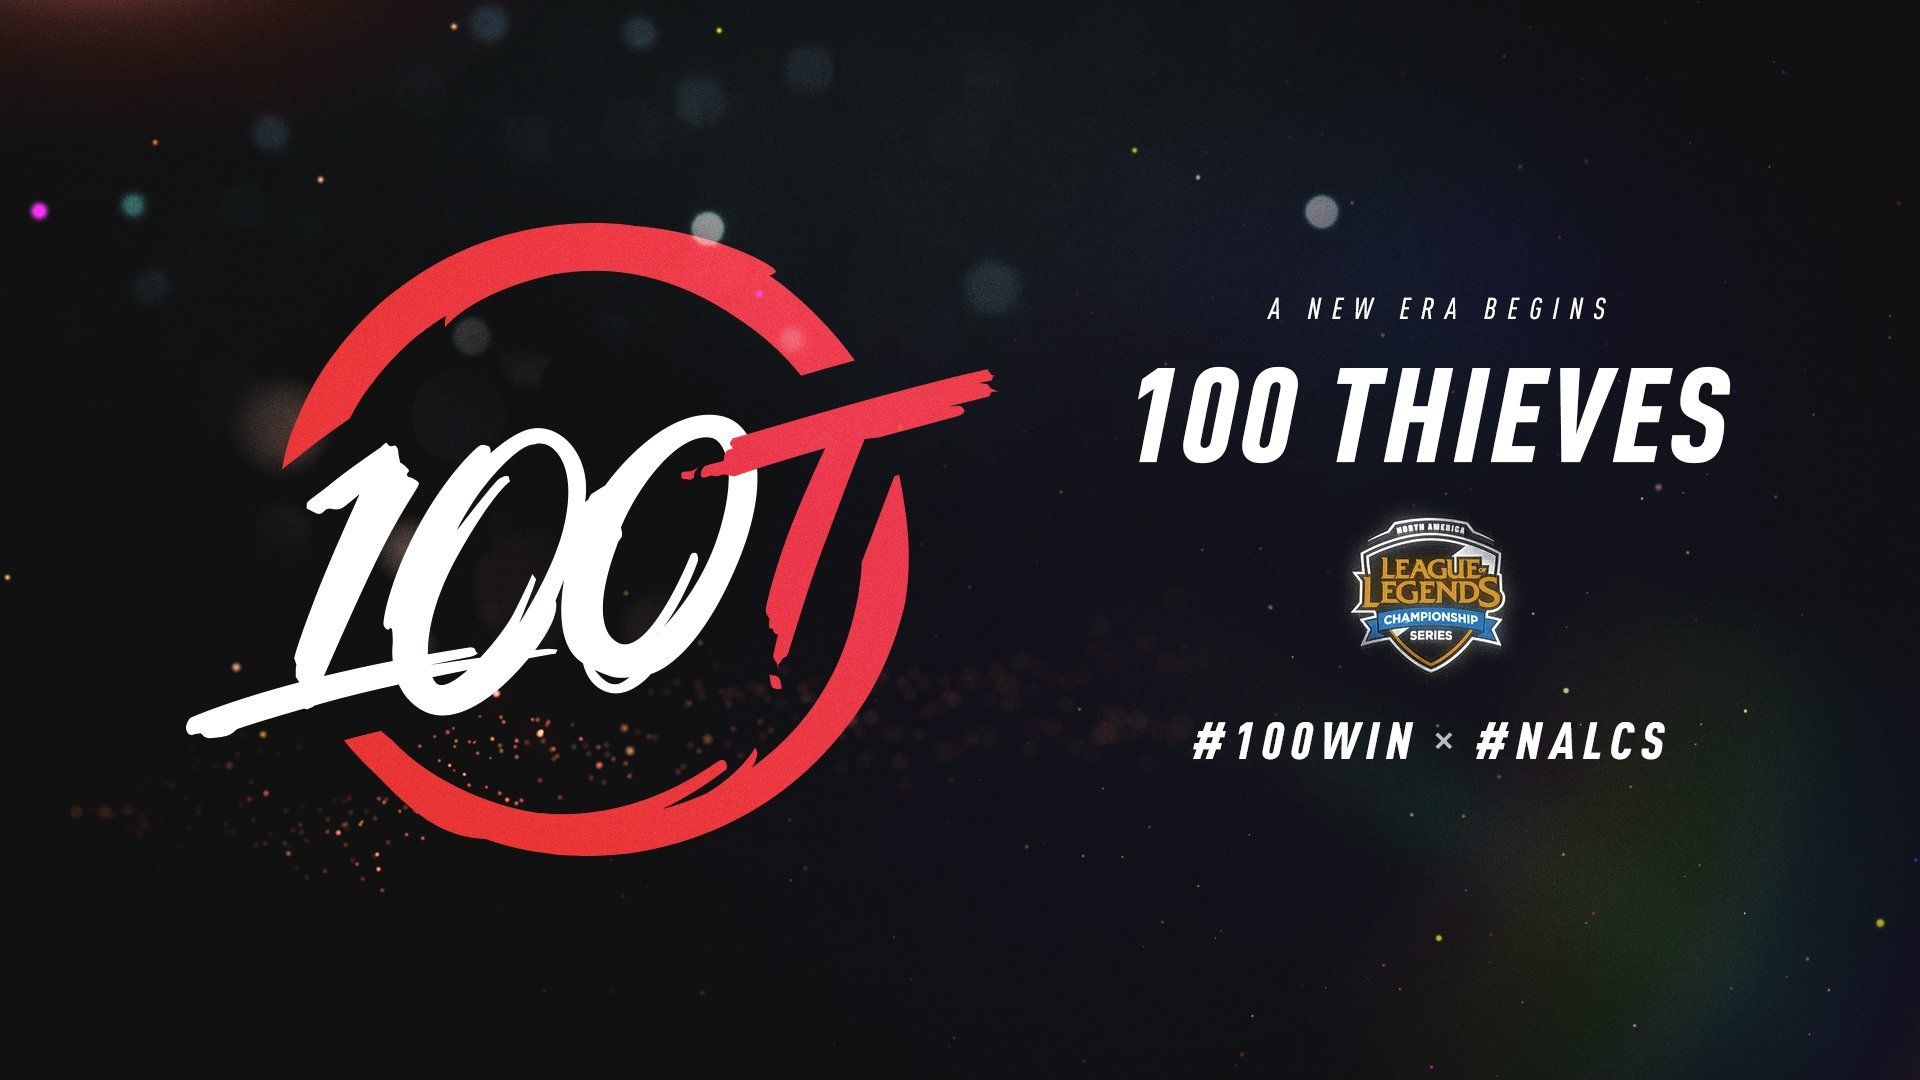 Nadeshot says 100 Thieves are here for the right reasons